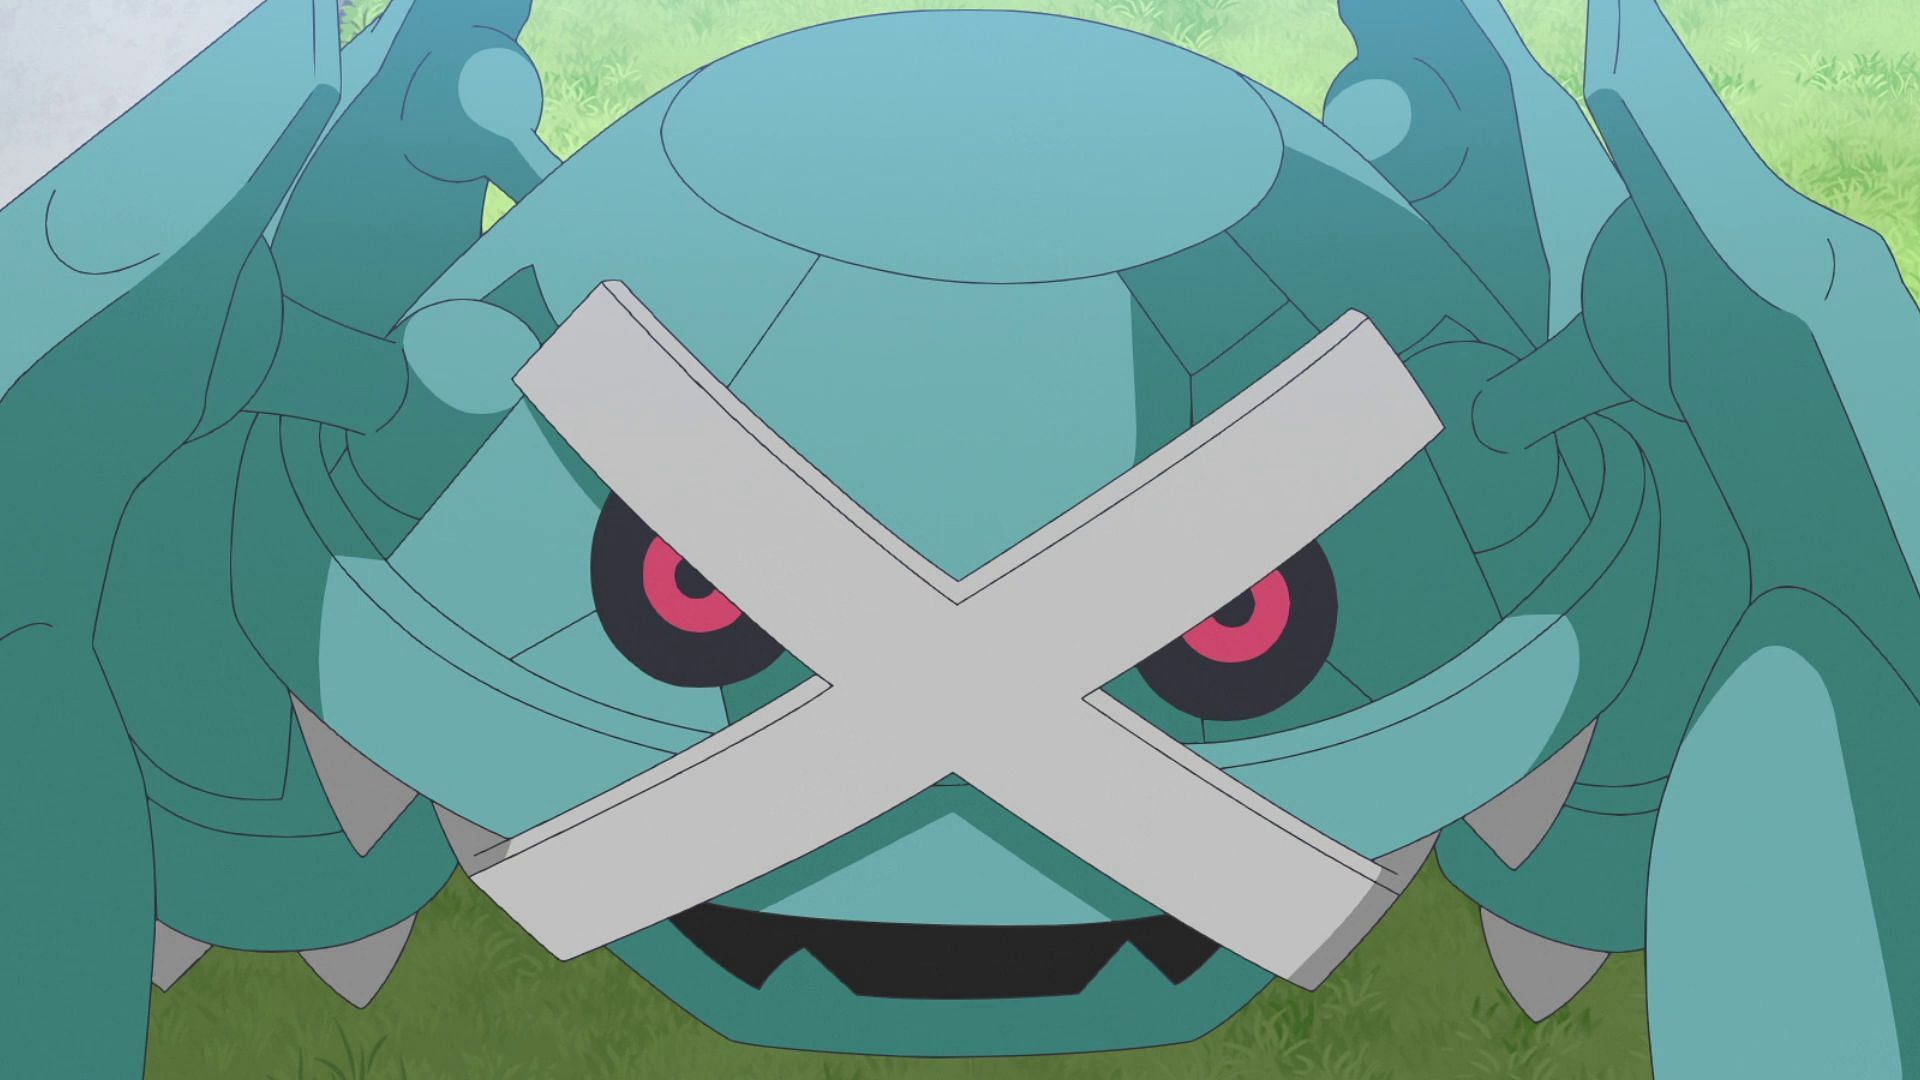 Metagross as seen in the anime (Image via The Pokemon Company)